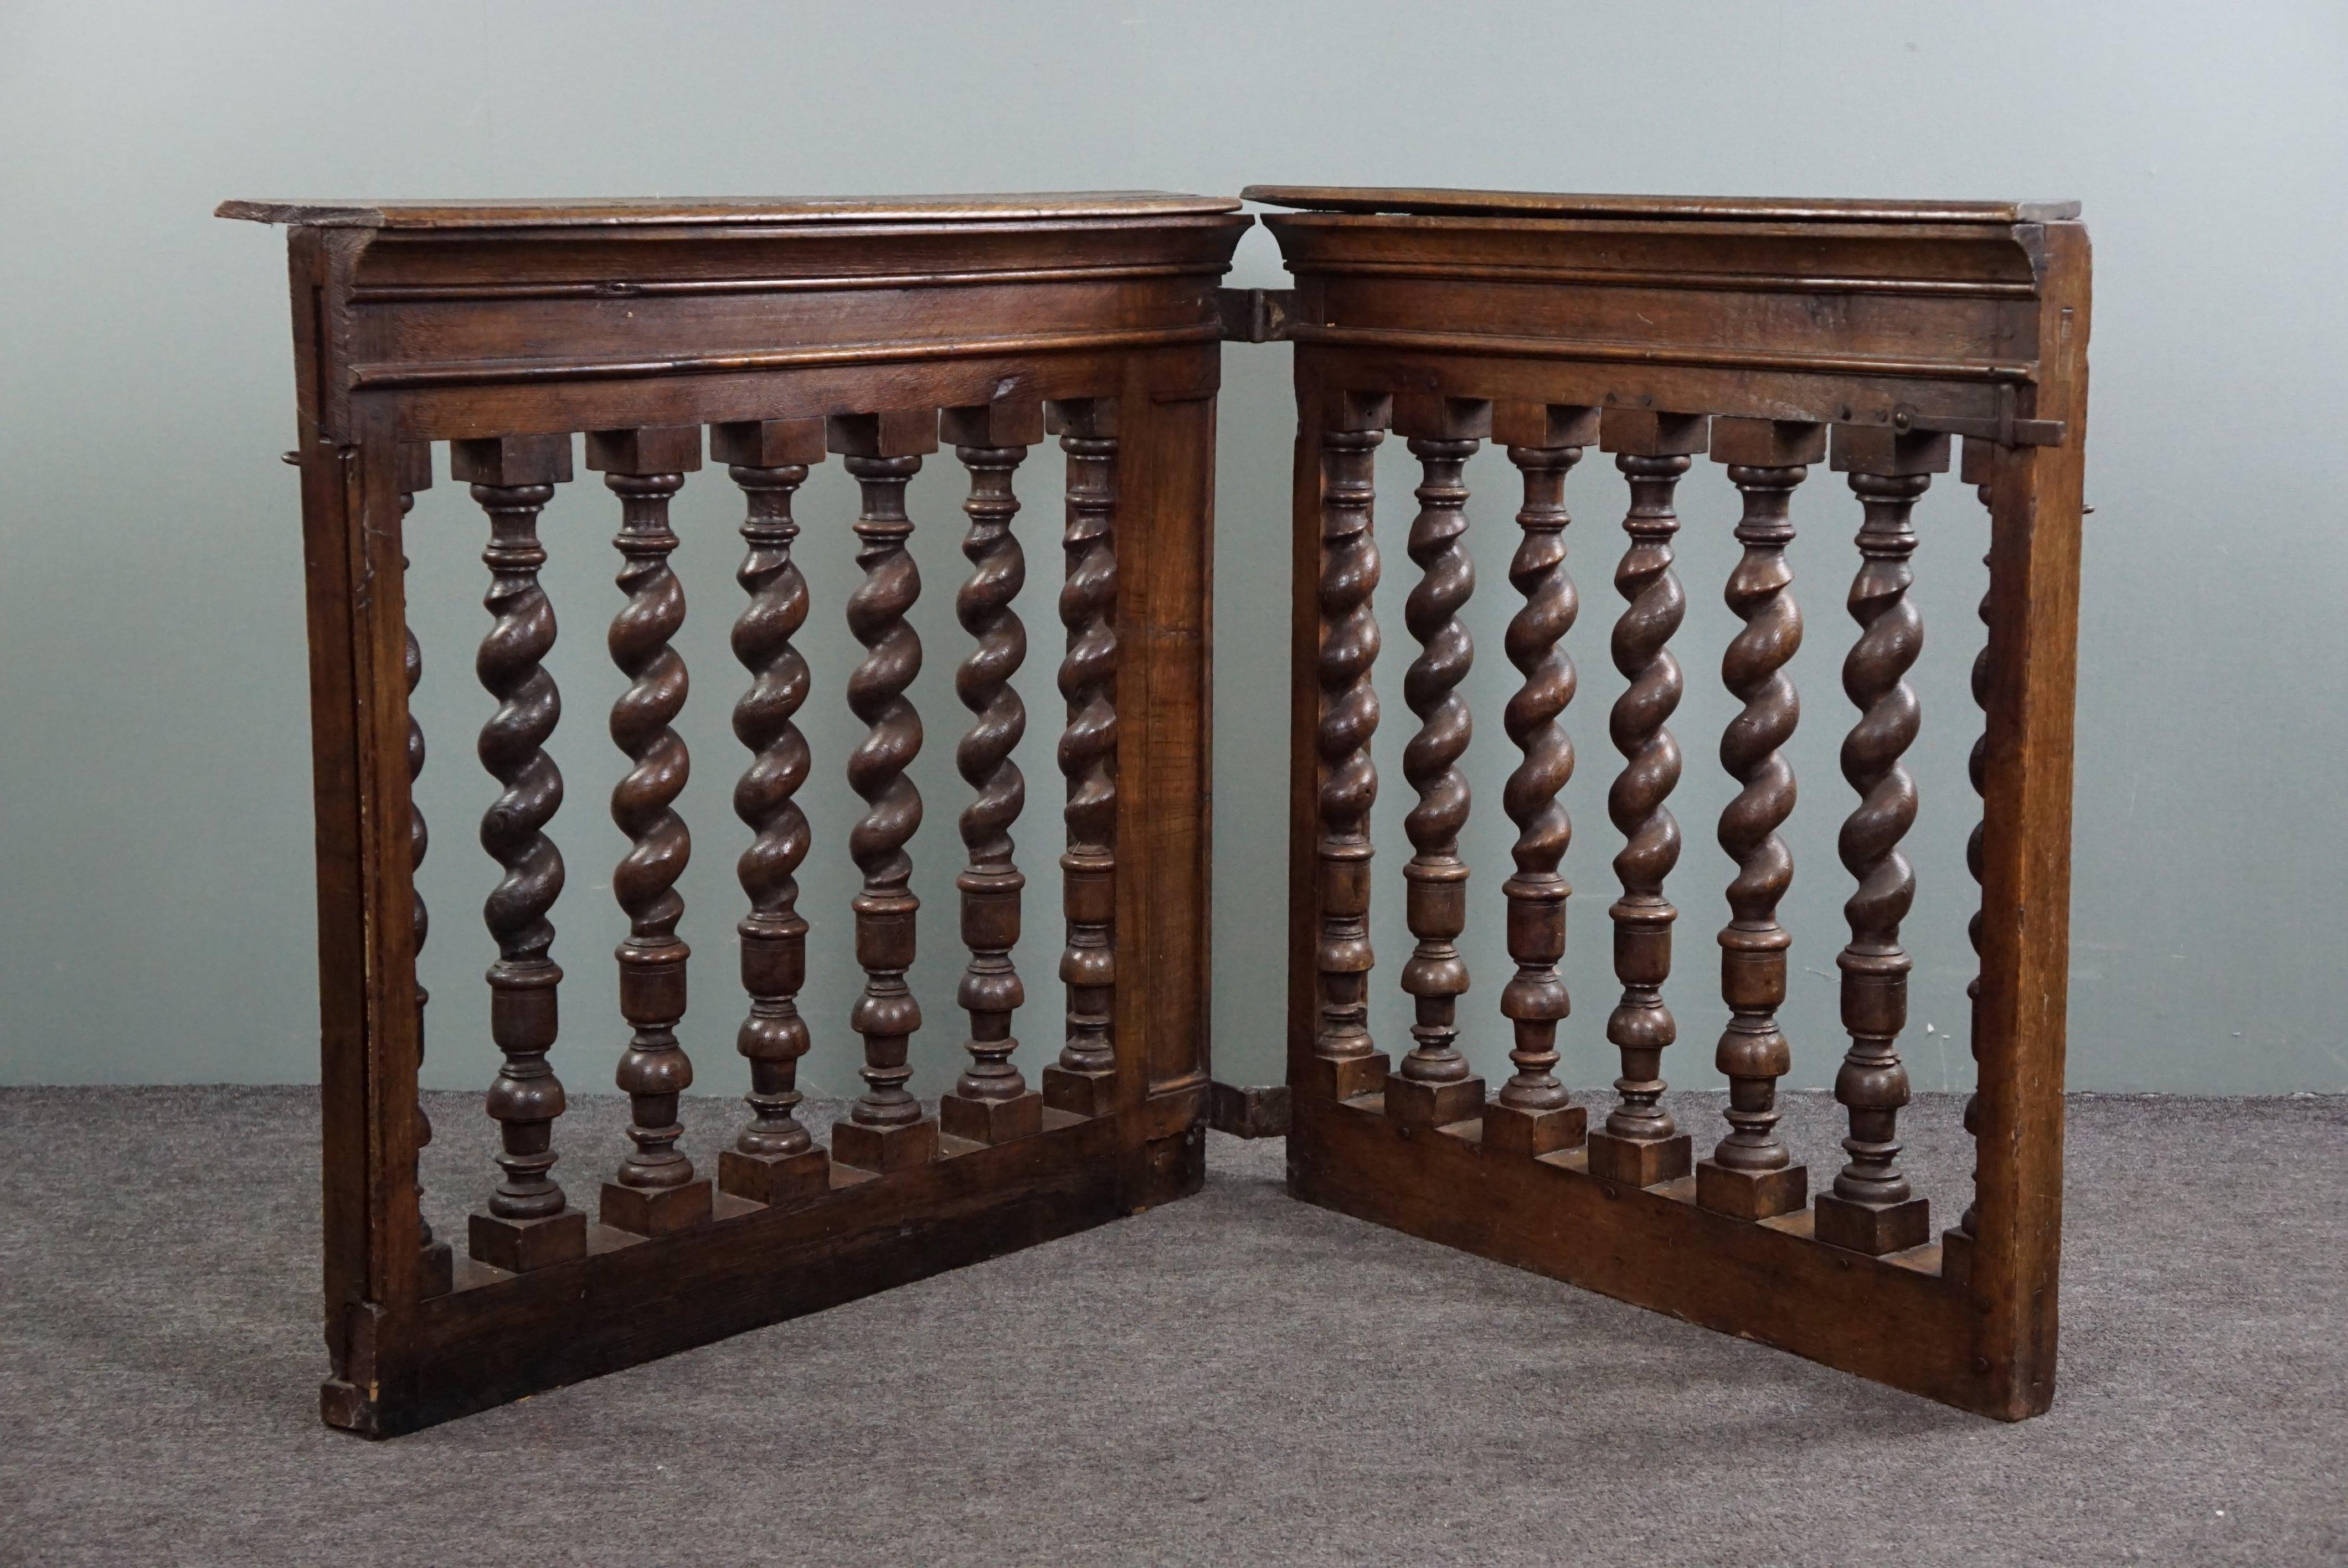 Offered is this antique 18th century balustrade.
Comes from a church, where this balustrade was probably placed as a barrier or access to another room. The hinge and latch are forged by hand and, together with the turned wooden pillars, provide a